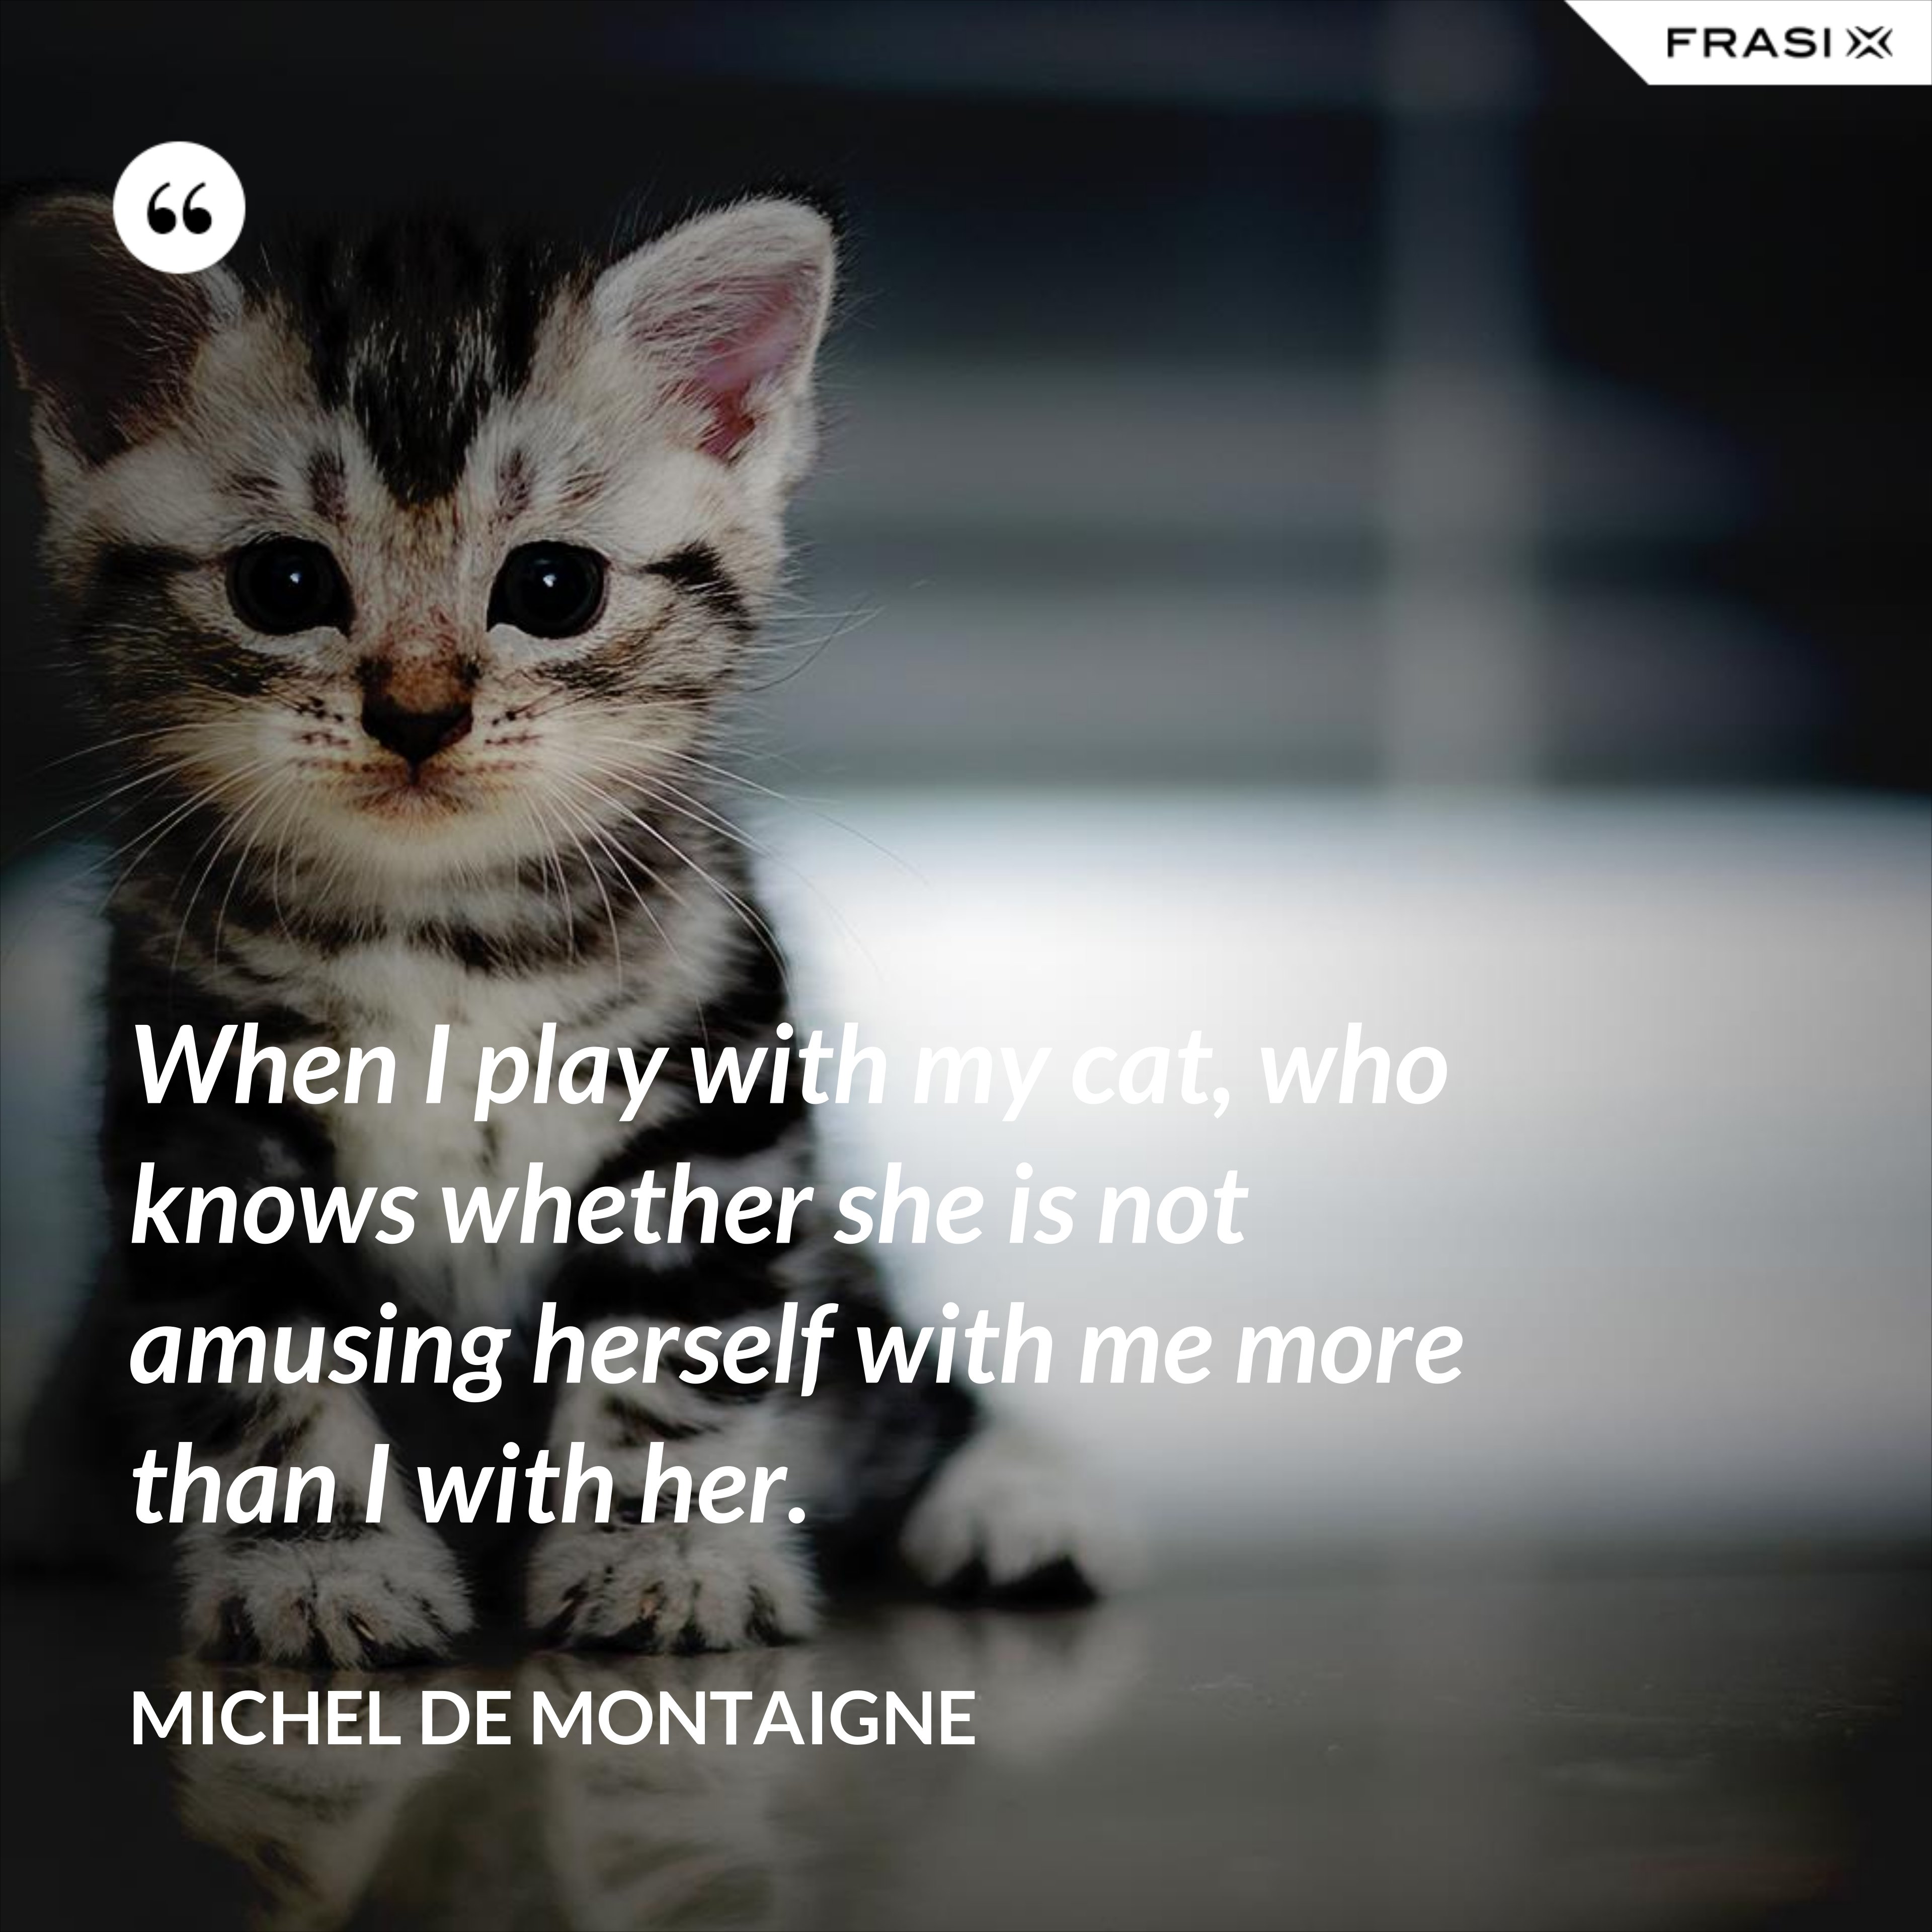 When I play with my cat, who knows whether she is not amusing herself with me more than I with her. - Michel de Montaigne